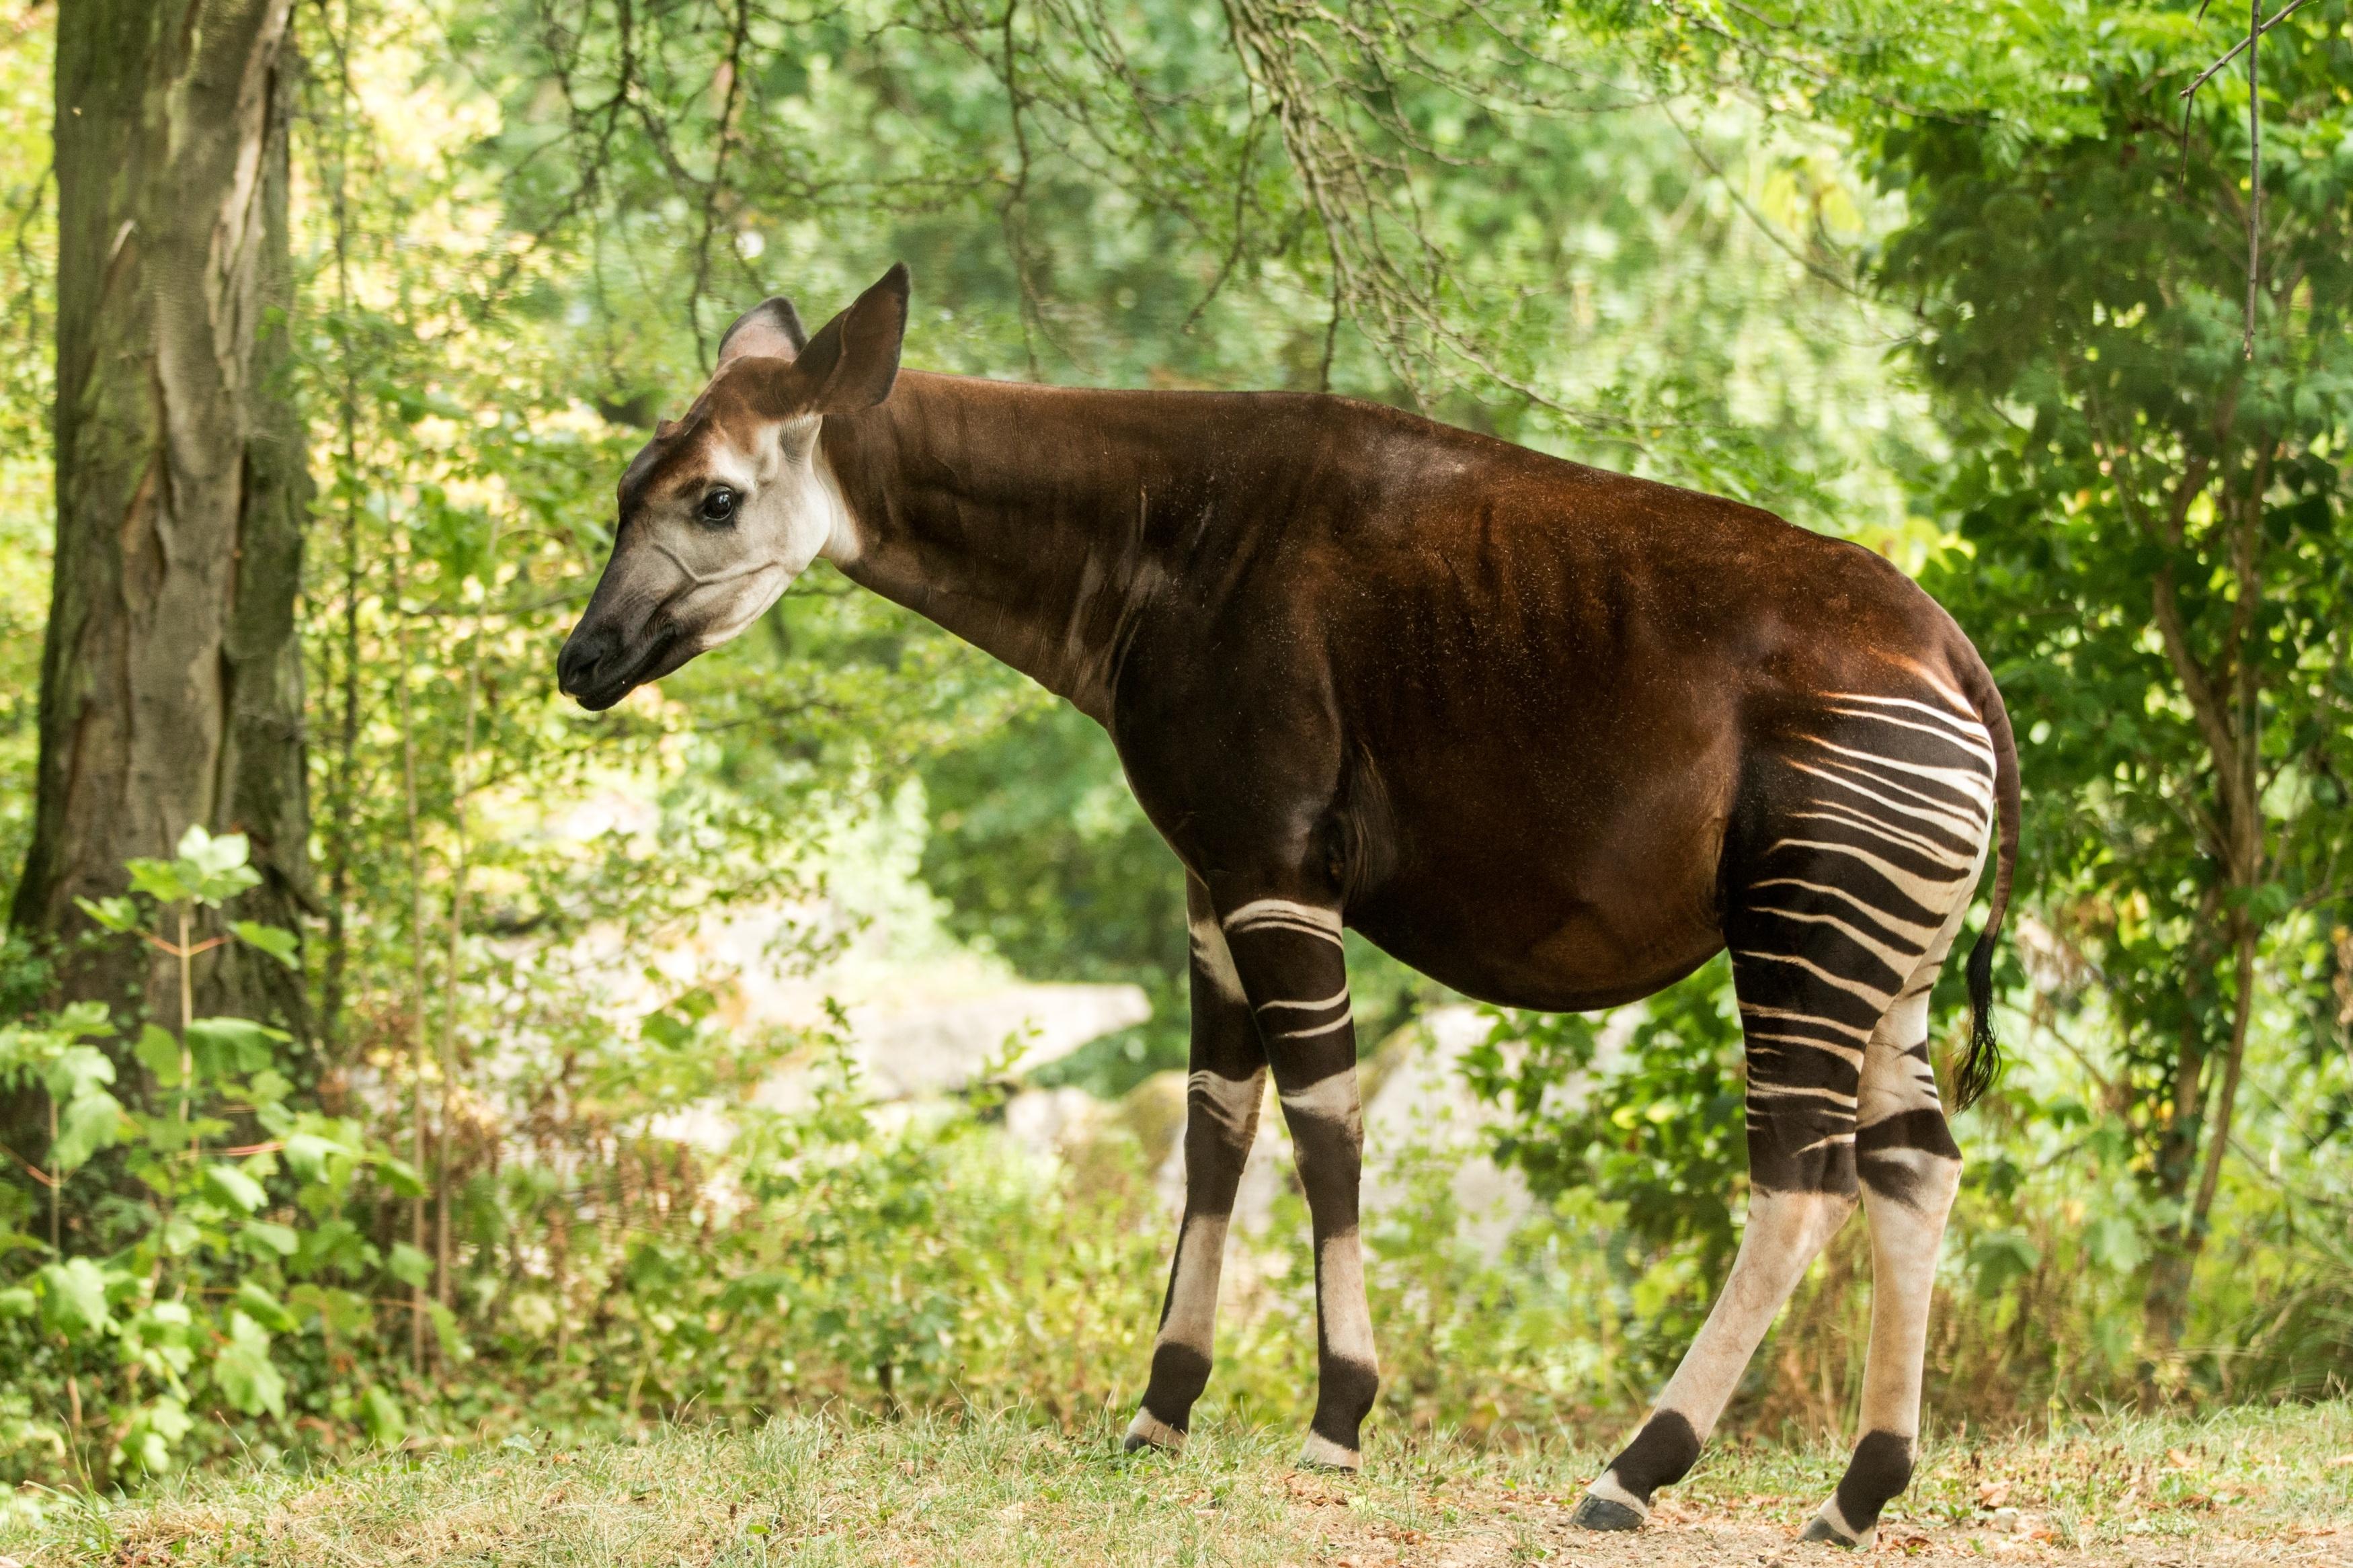 this-unique-animal-known-as-an-okapi-might-look-like-a-zebra-but-it-s